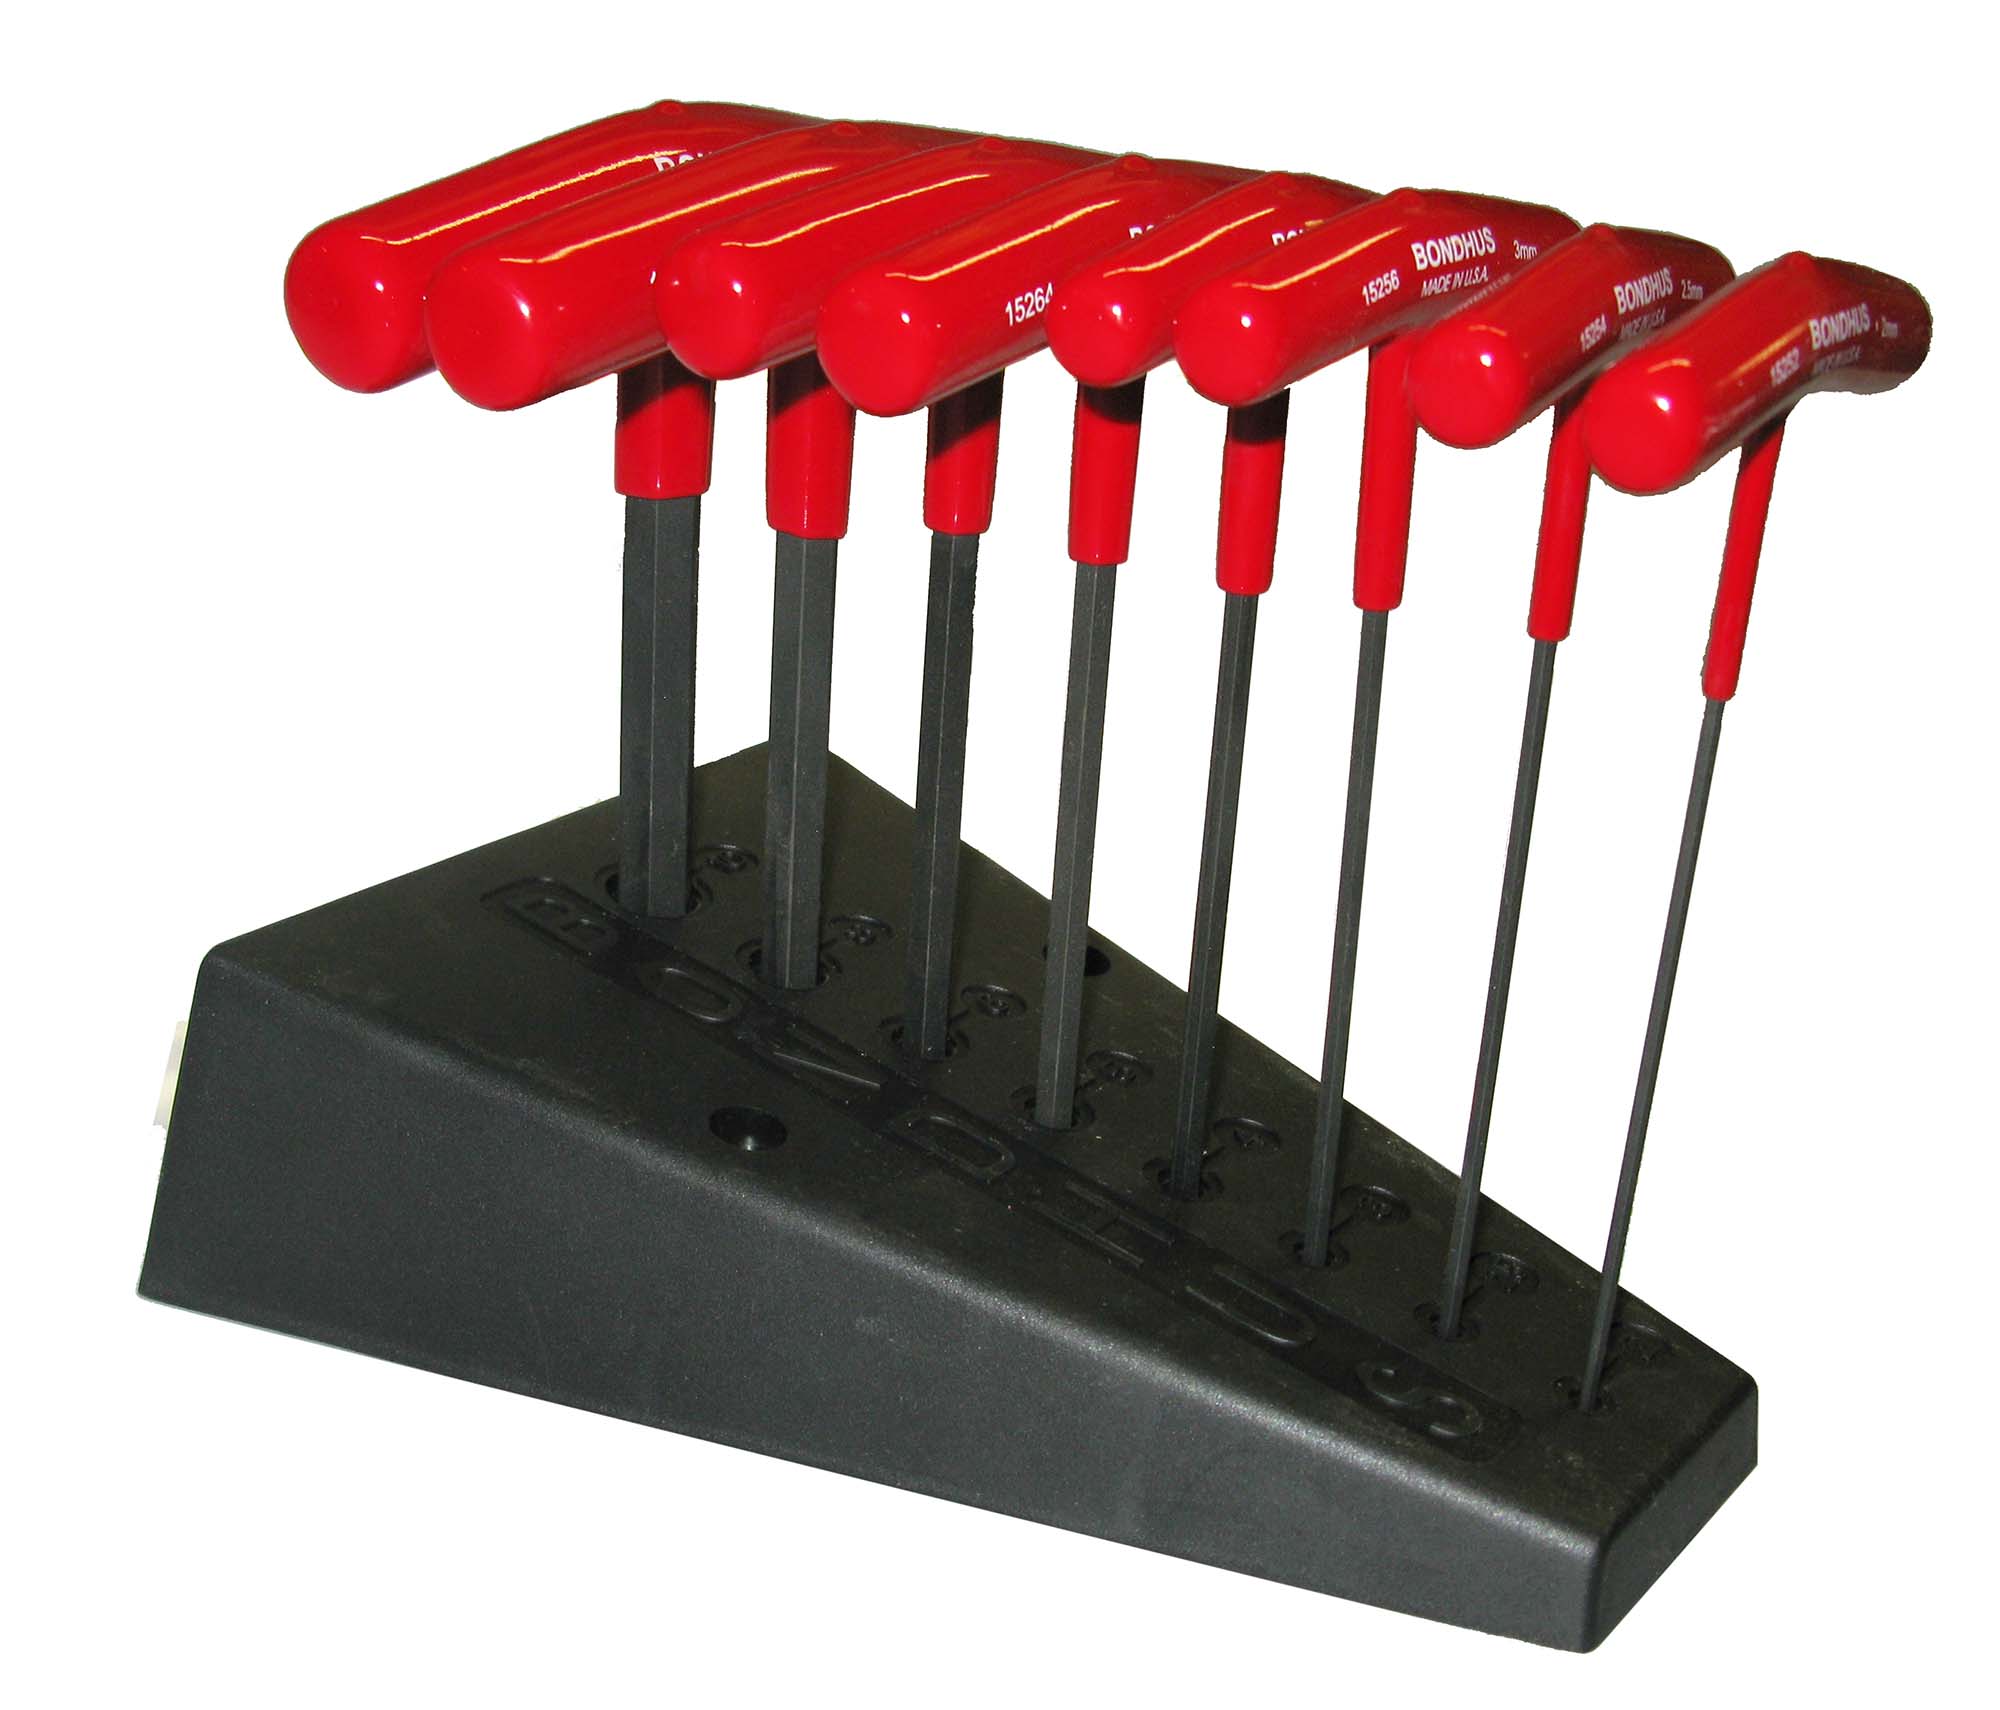 Bondhus 15289  6" Long, Metric T Handle Hex Key Set 2mm to 10mm with stand, set of 8